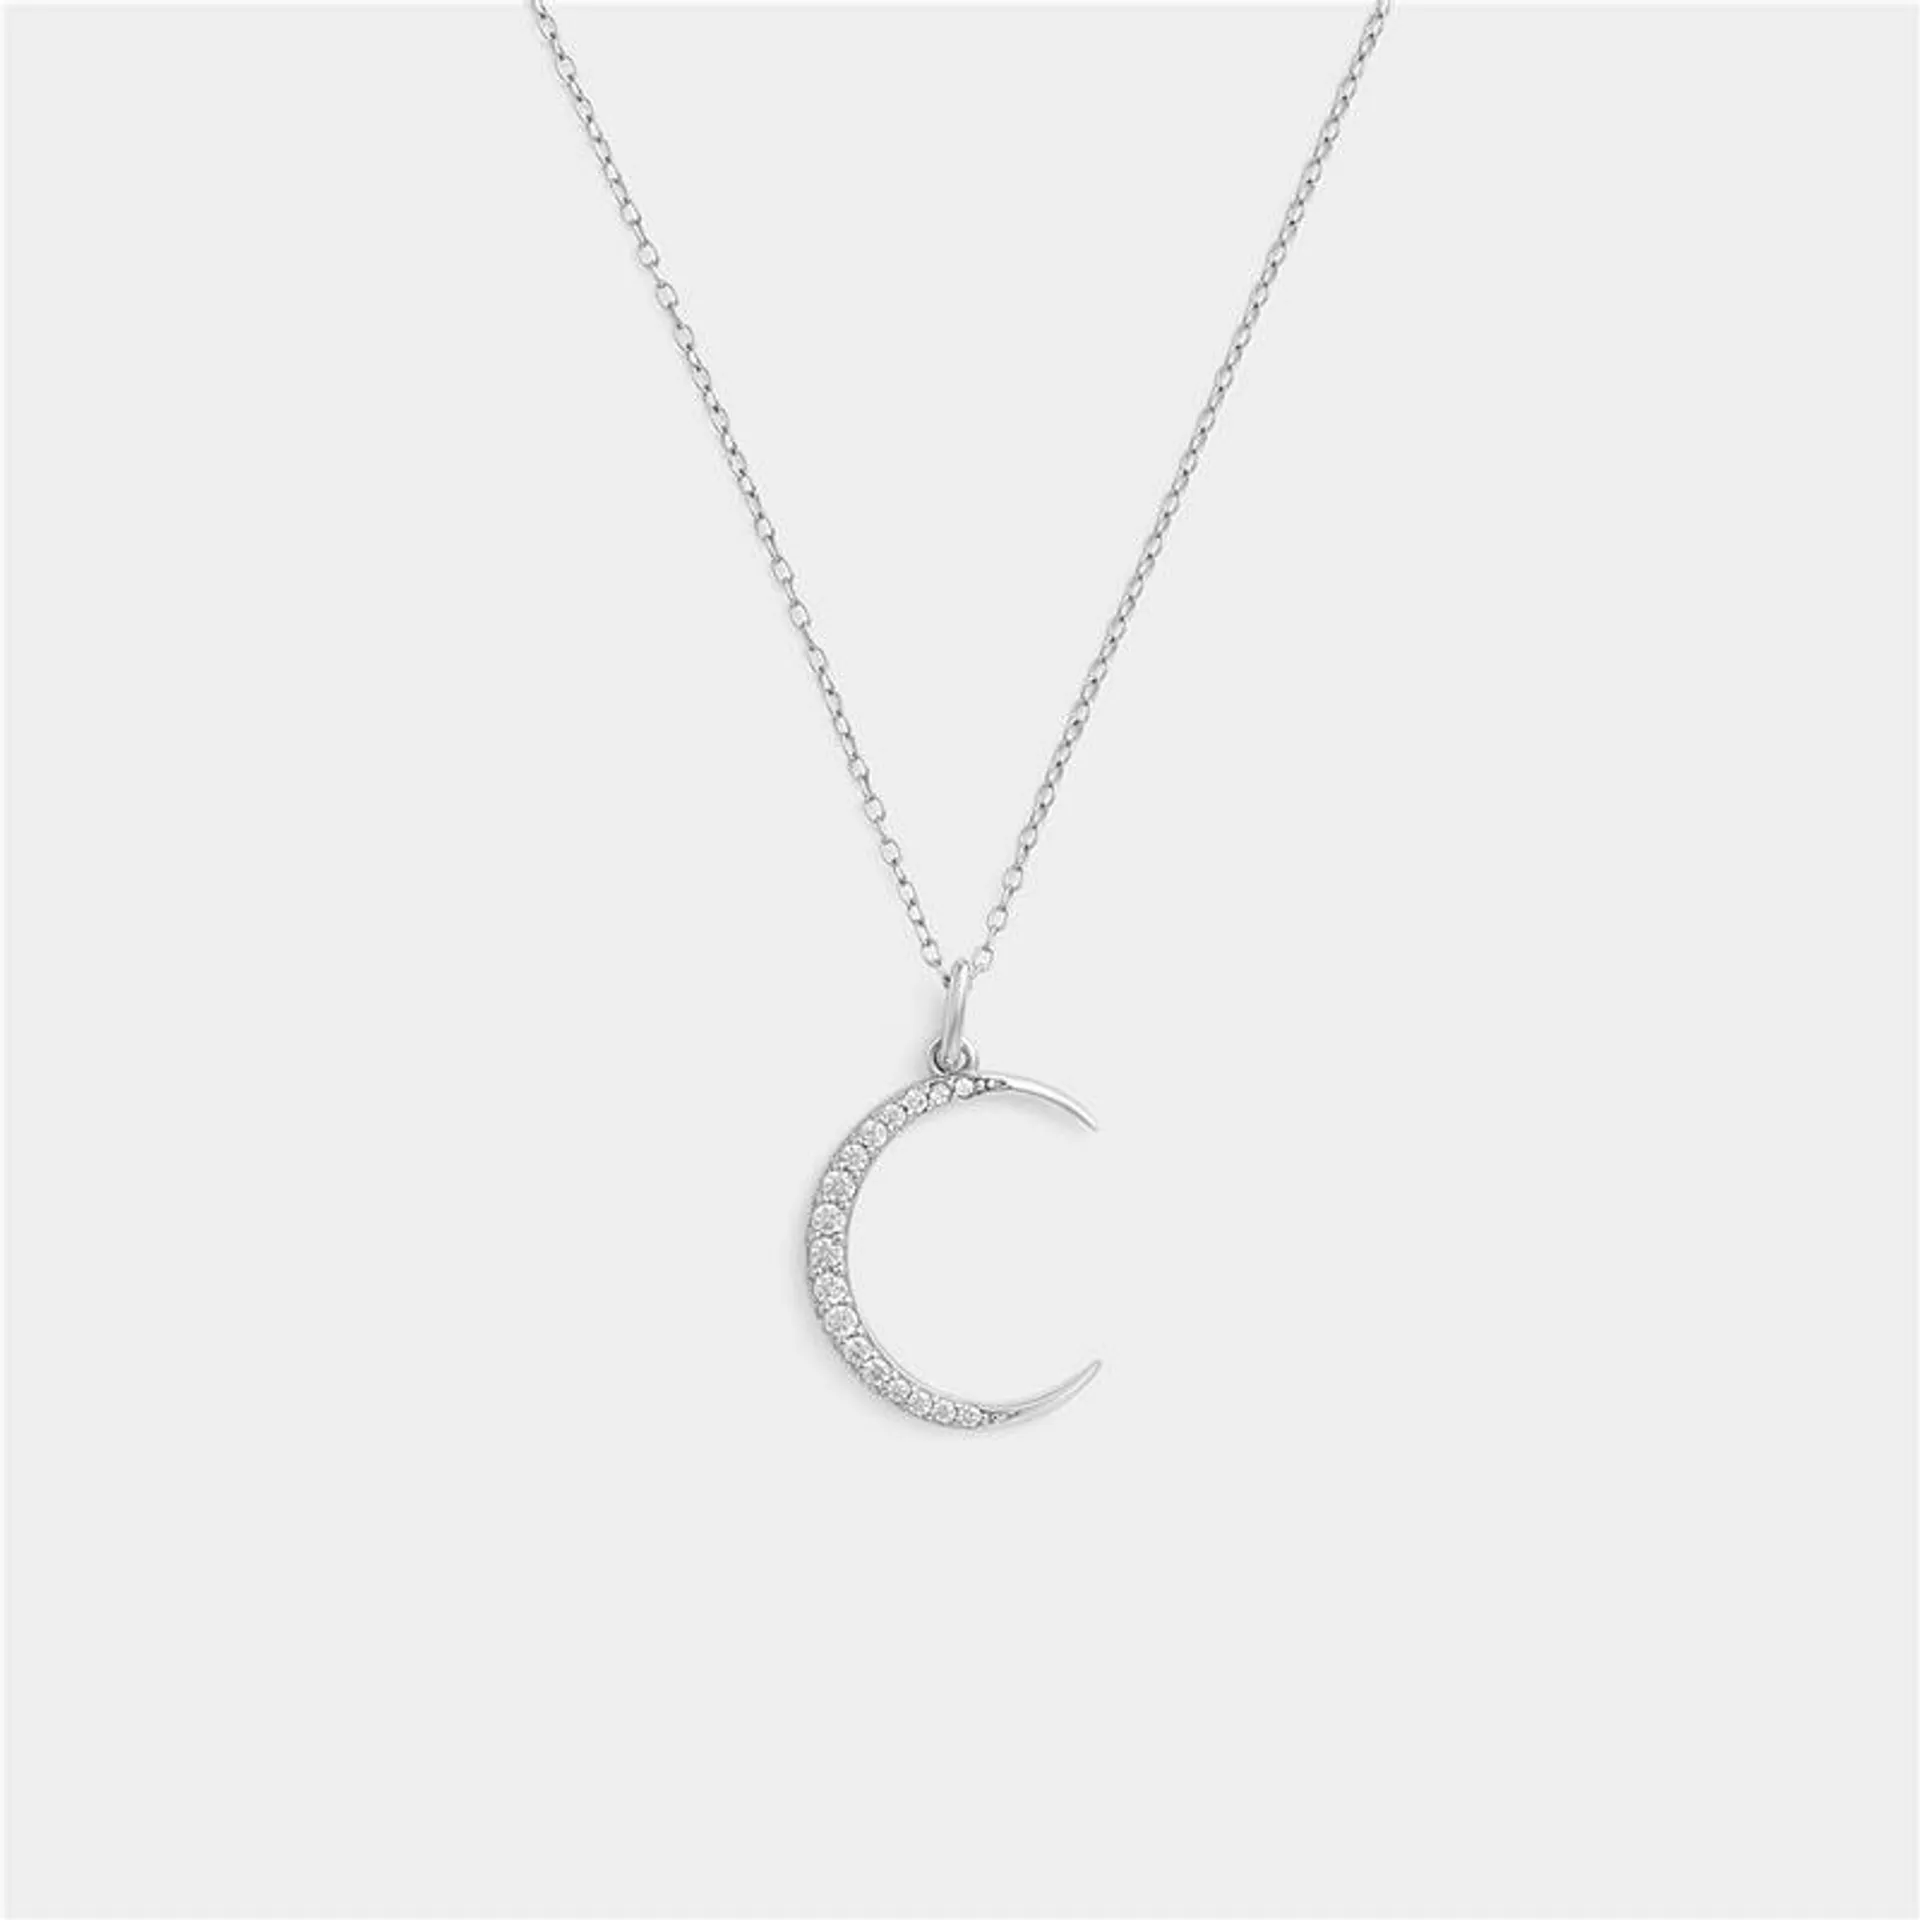 Sterling Silver Cubic Zirconia Crescent Moon Pendant